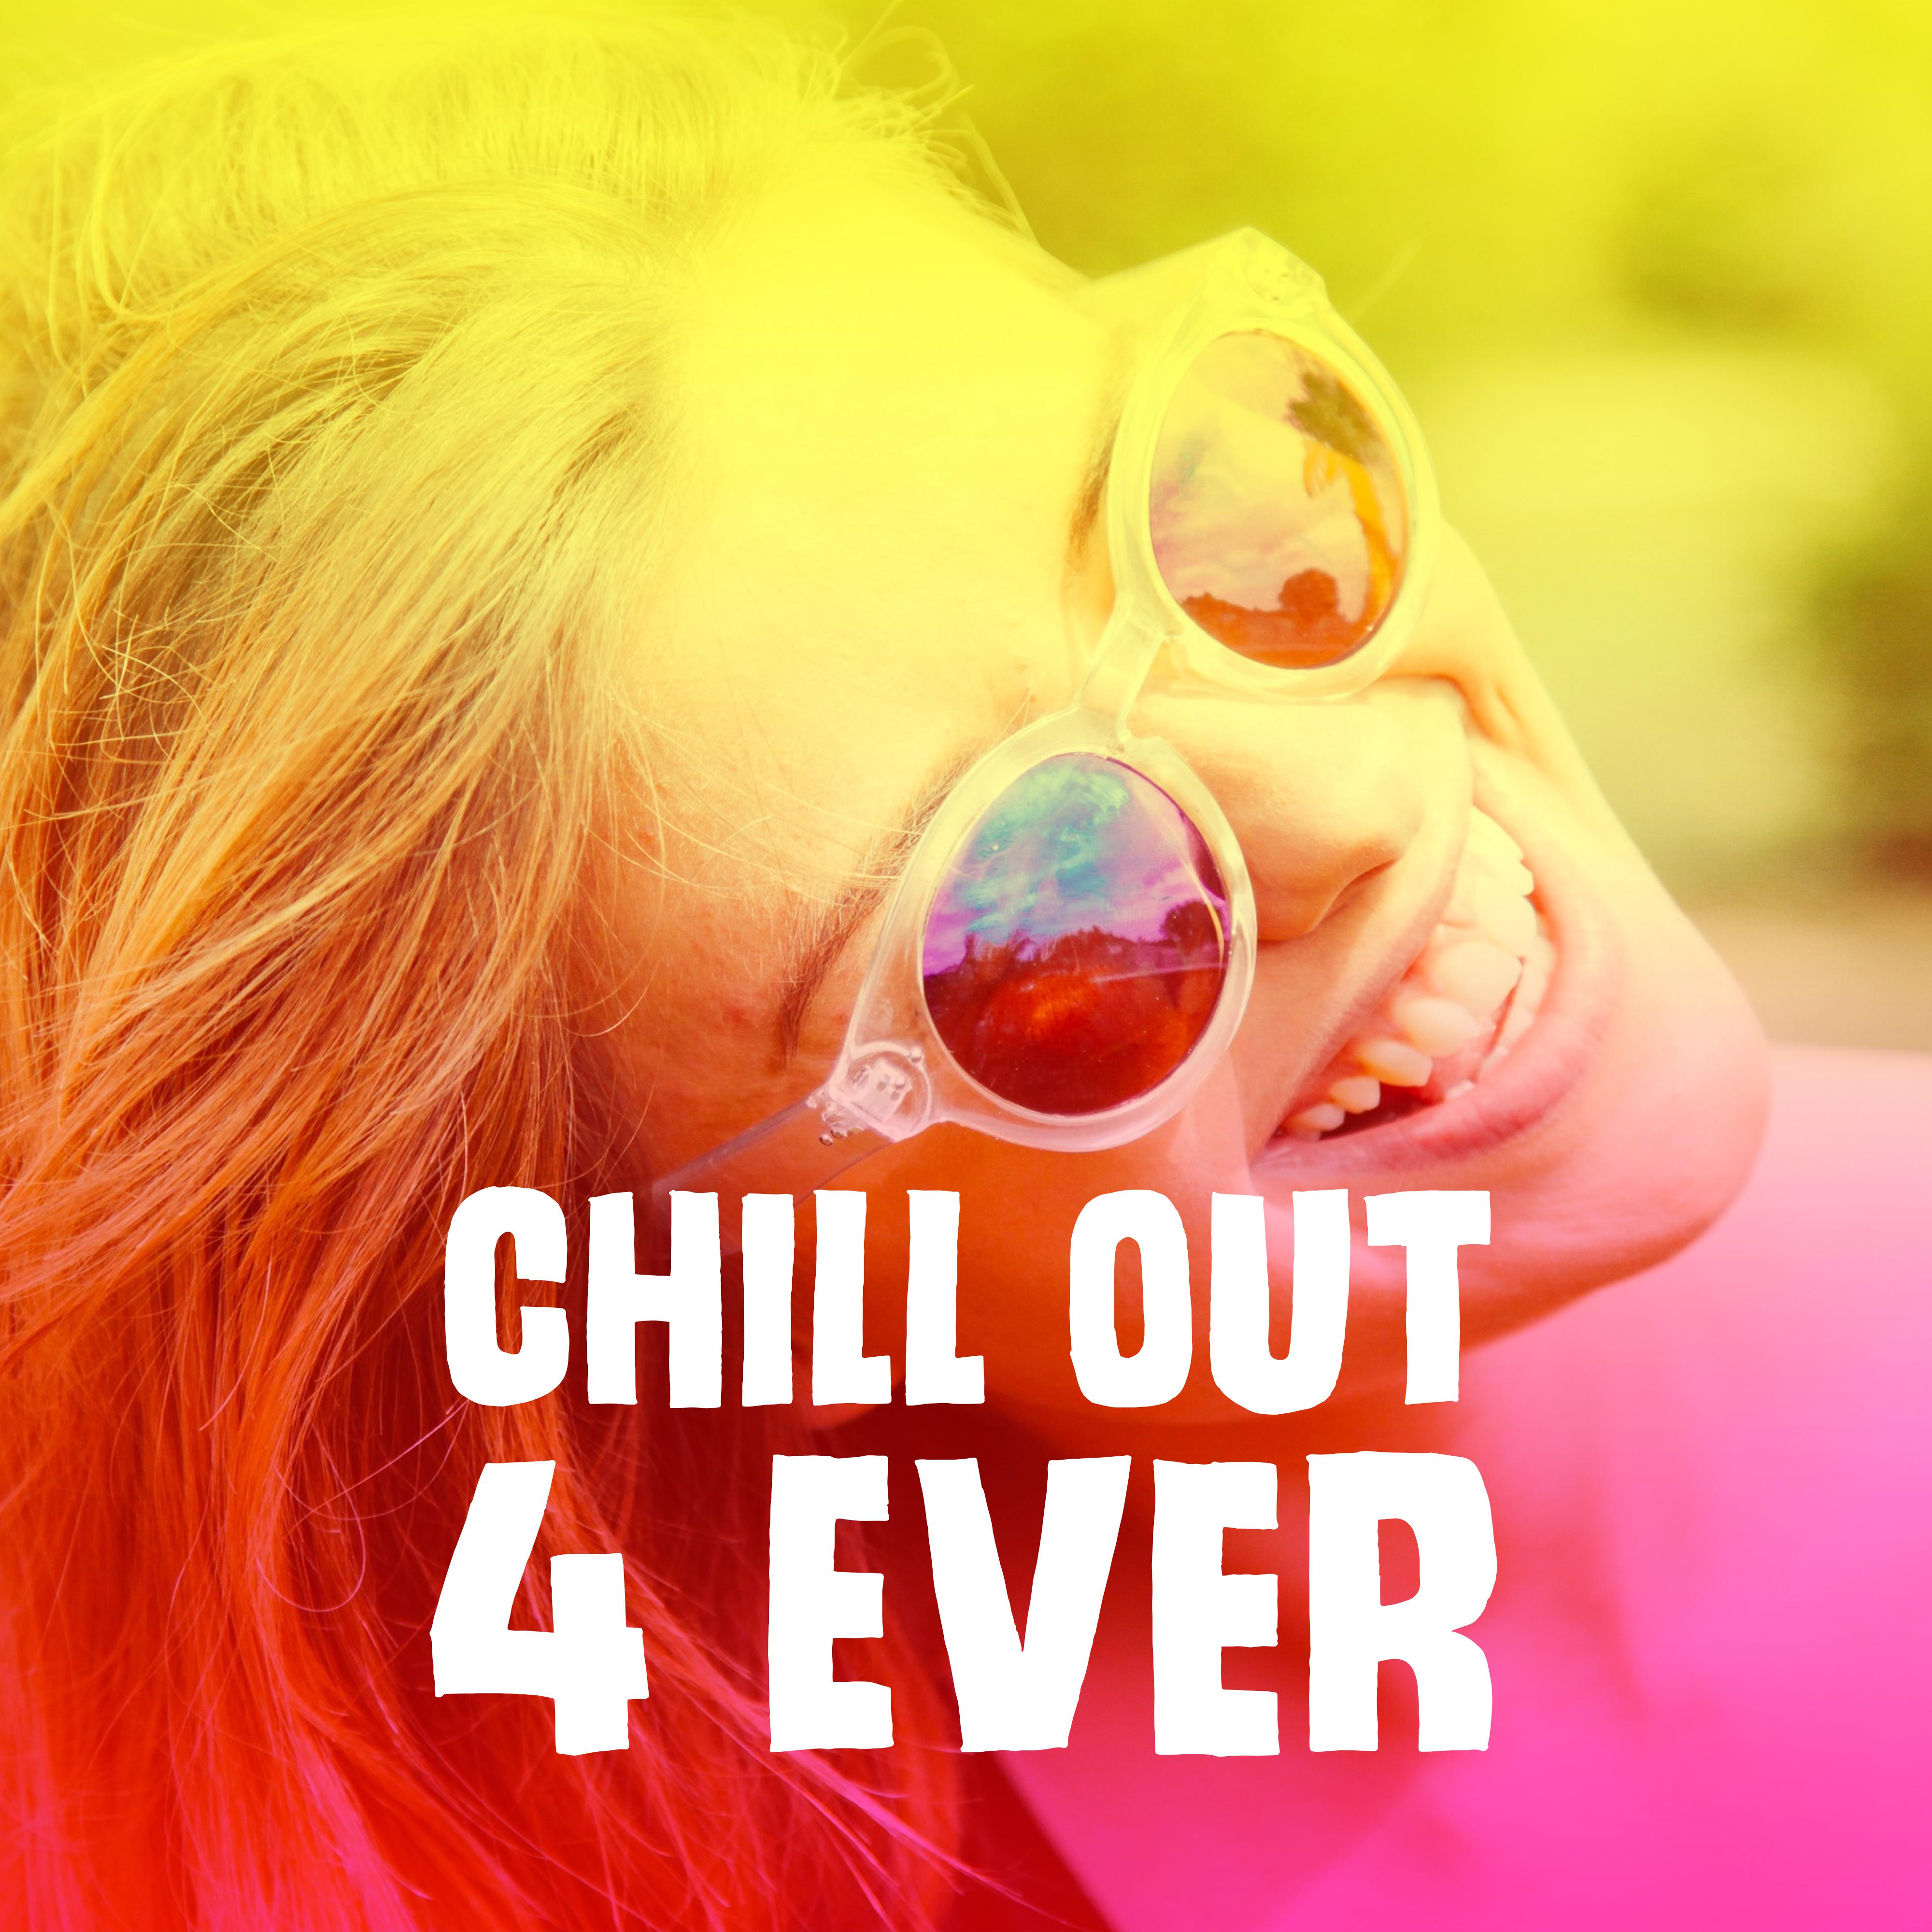 Chill Out 4 Ever  Deep Relaxation, Ibiza 2017, Lounge Summer, Beach Chill, Tropical Lounge Music, Zen